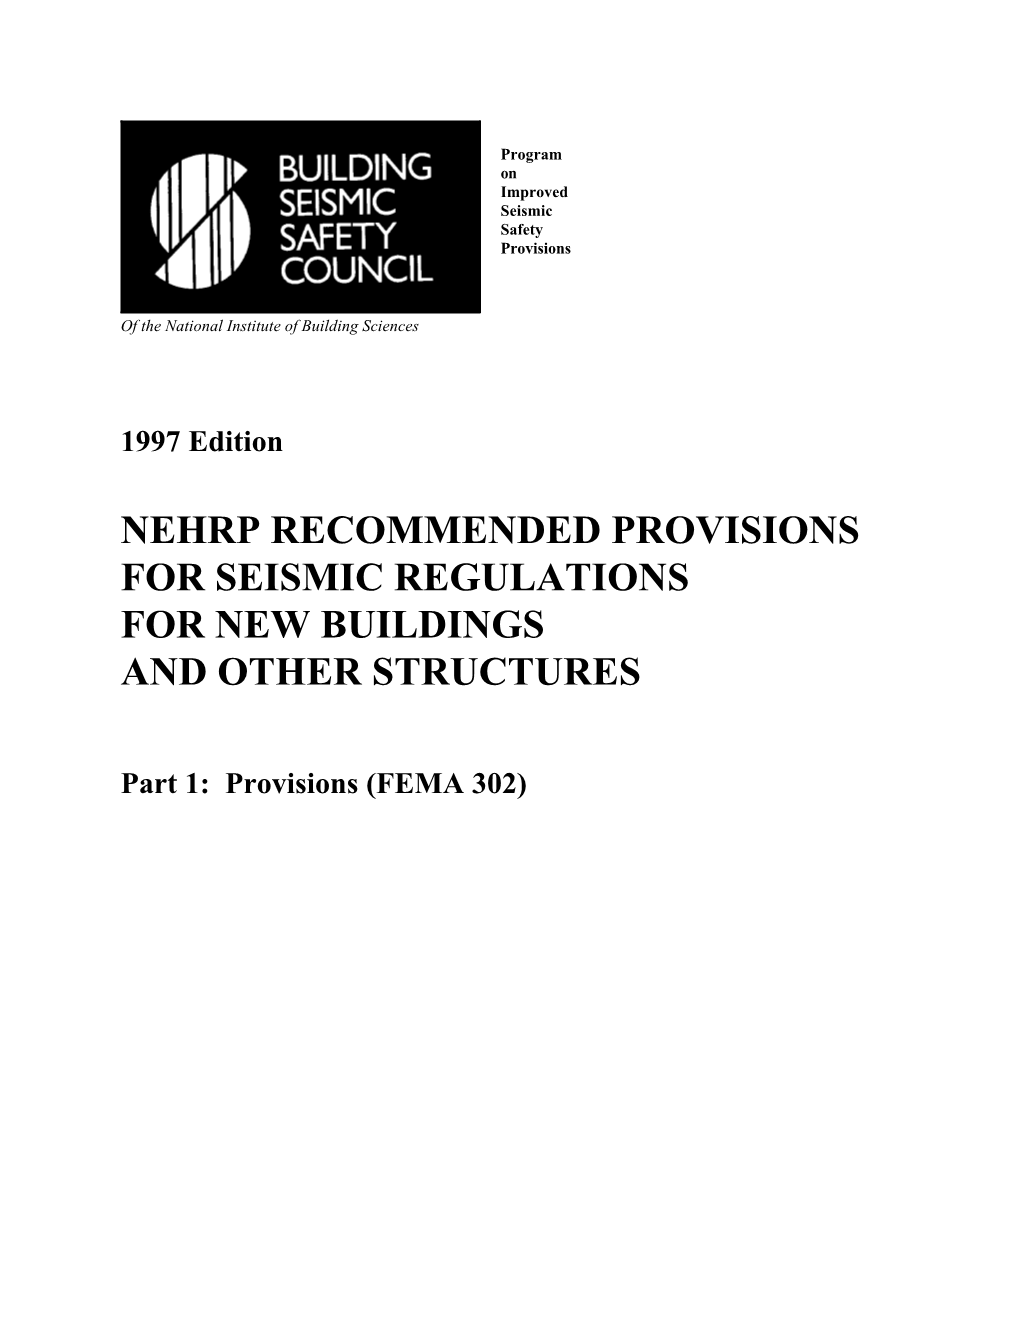 FEMA 302 NEHRP Recommended Provisions for Seismic Regulations